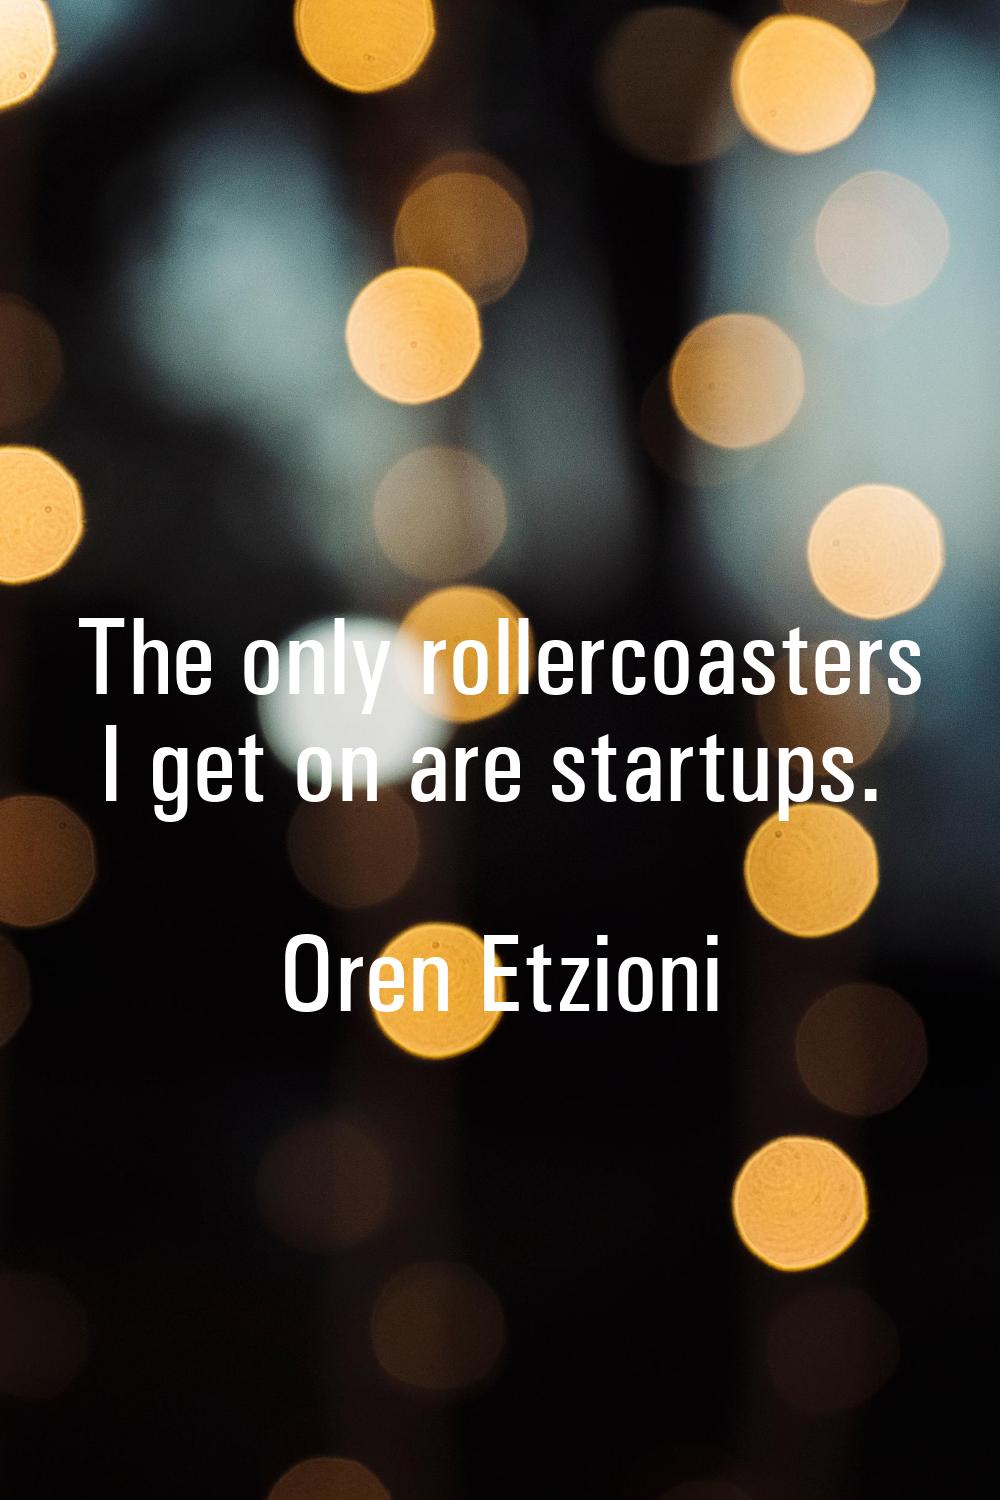 The only rollercoasters I get on are startups.